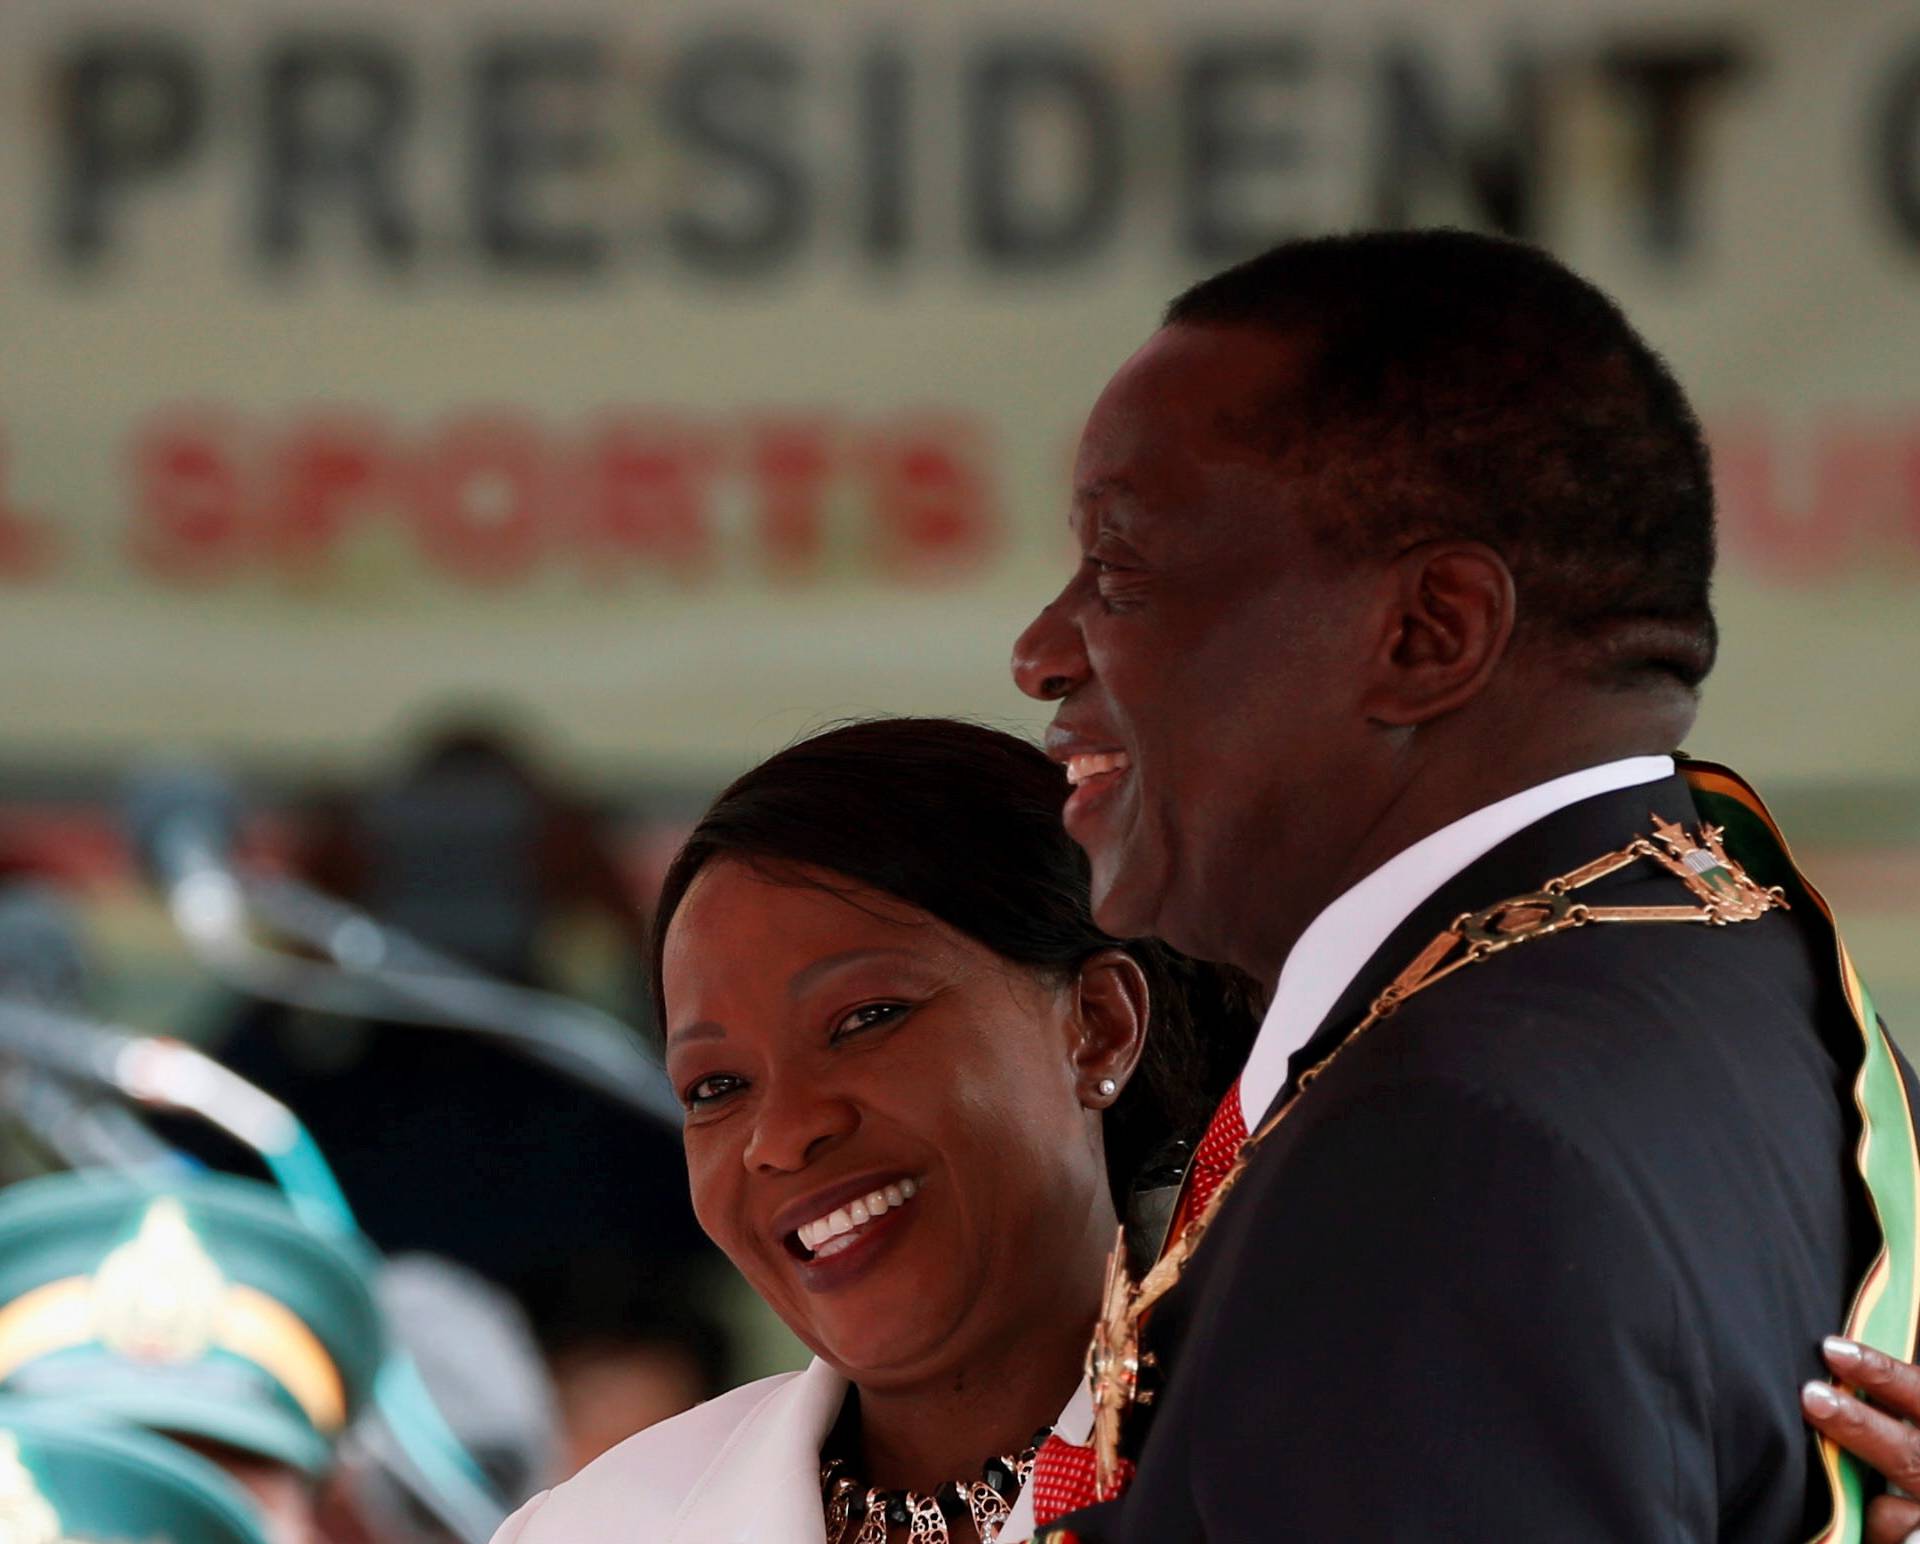 Emmerson Mnangagwa and his wife Auxilia smile after he was sworn in as Zimbabwe's president in Harare